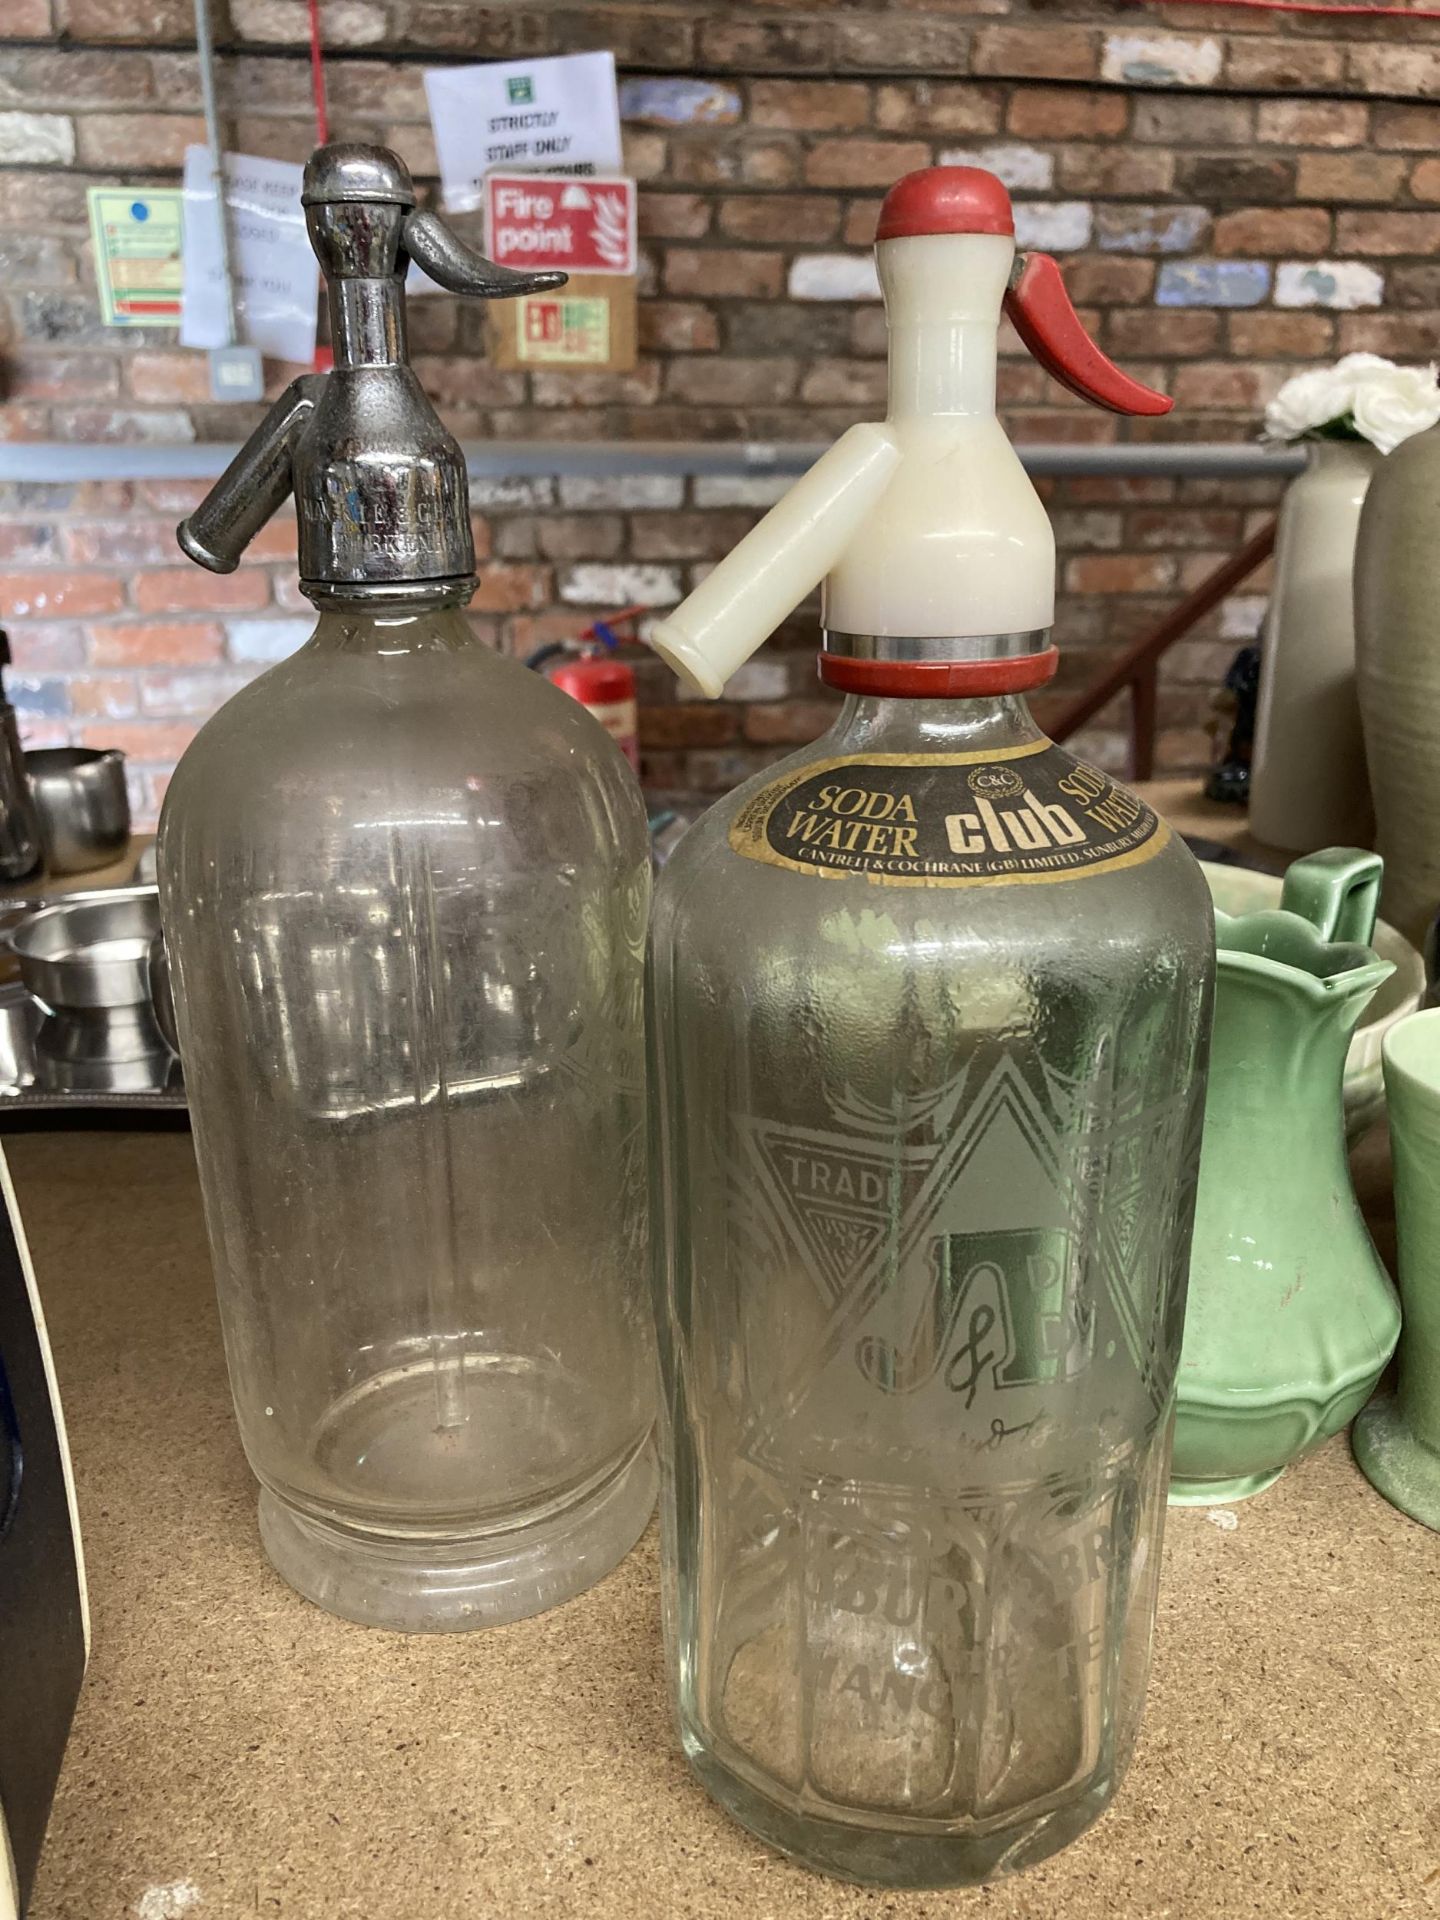 TWO VINTAGE SODA WATER GLASS SIPHONS - Image 4 of 4